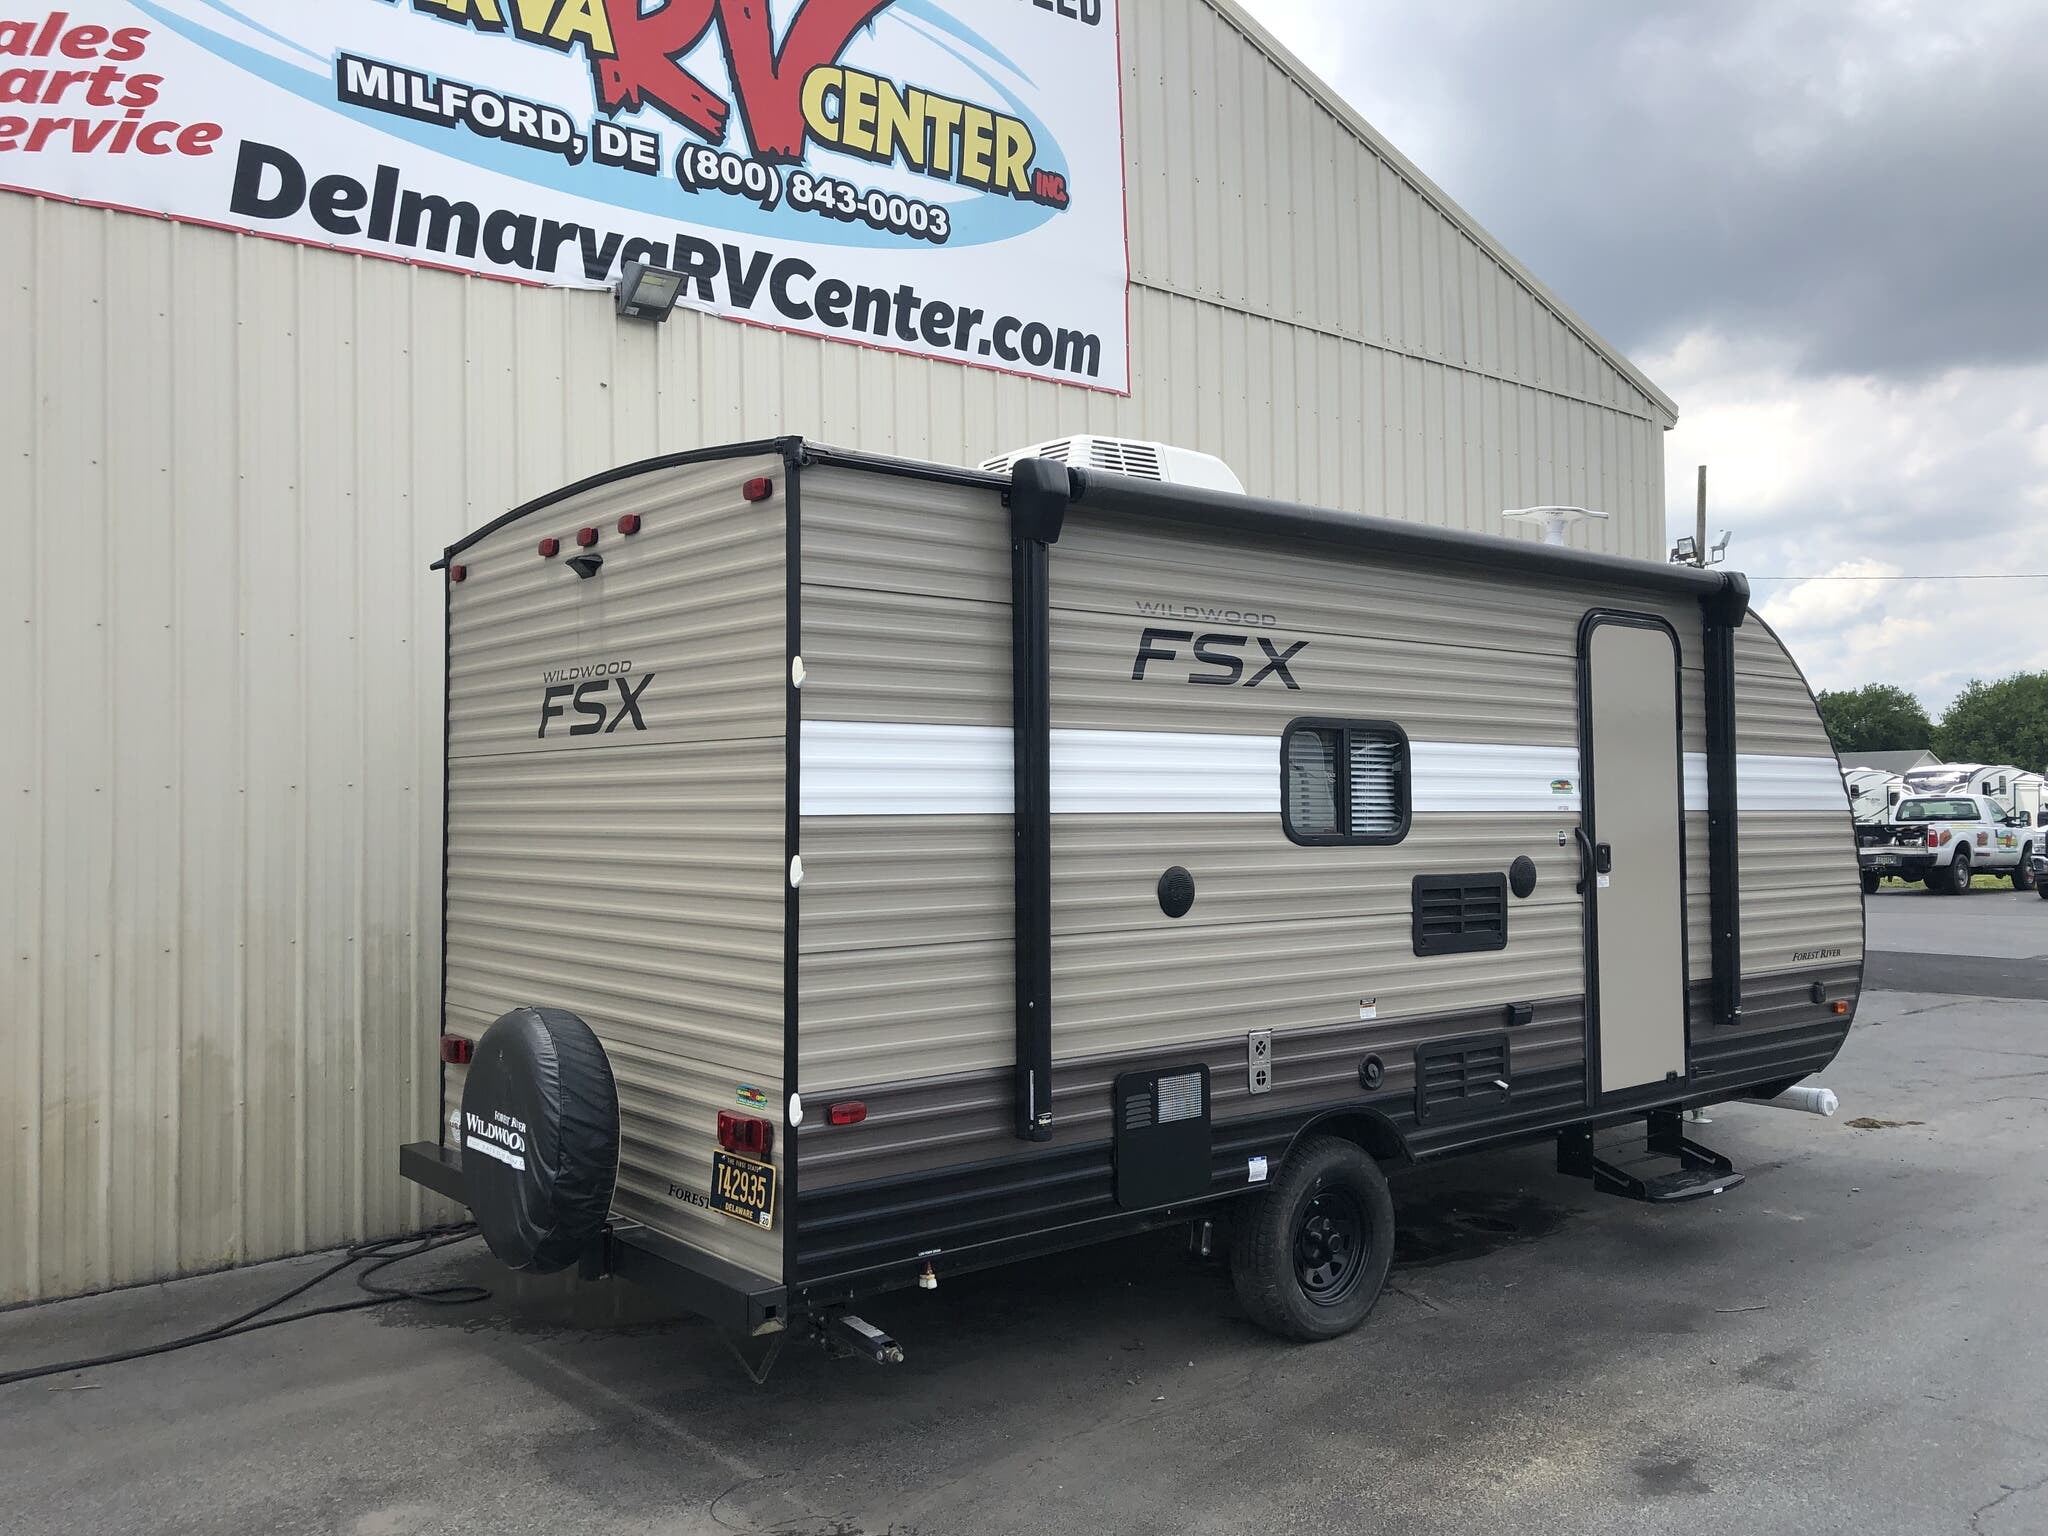 2018 Forest River Wildwood FSX 197BH RV for Sale in Milford, DE 19963 | UM18937 | RVUSA.com 2018 Forest River Wildwood Fsx 197bh Specs